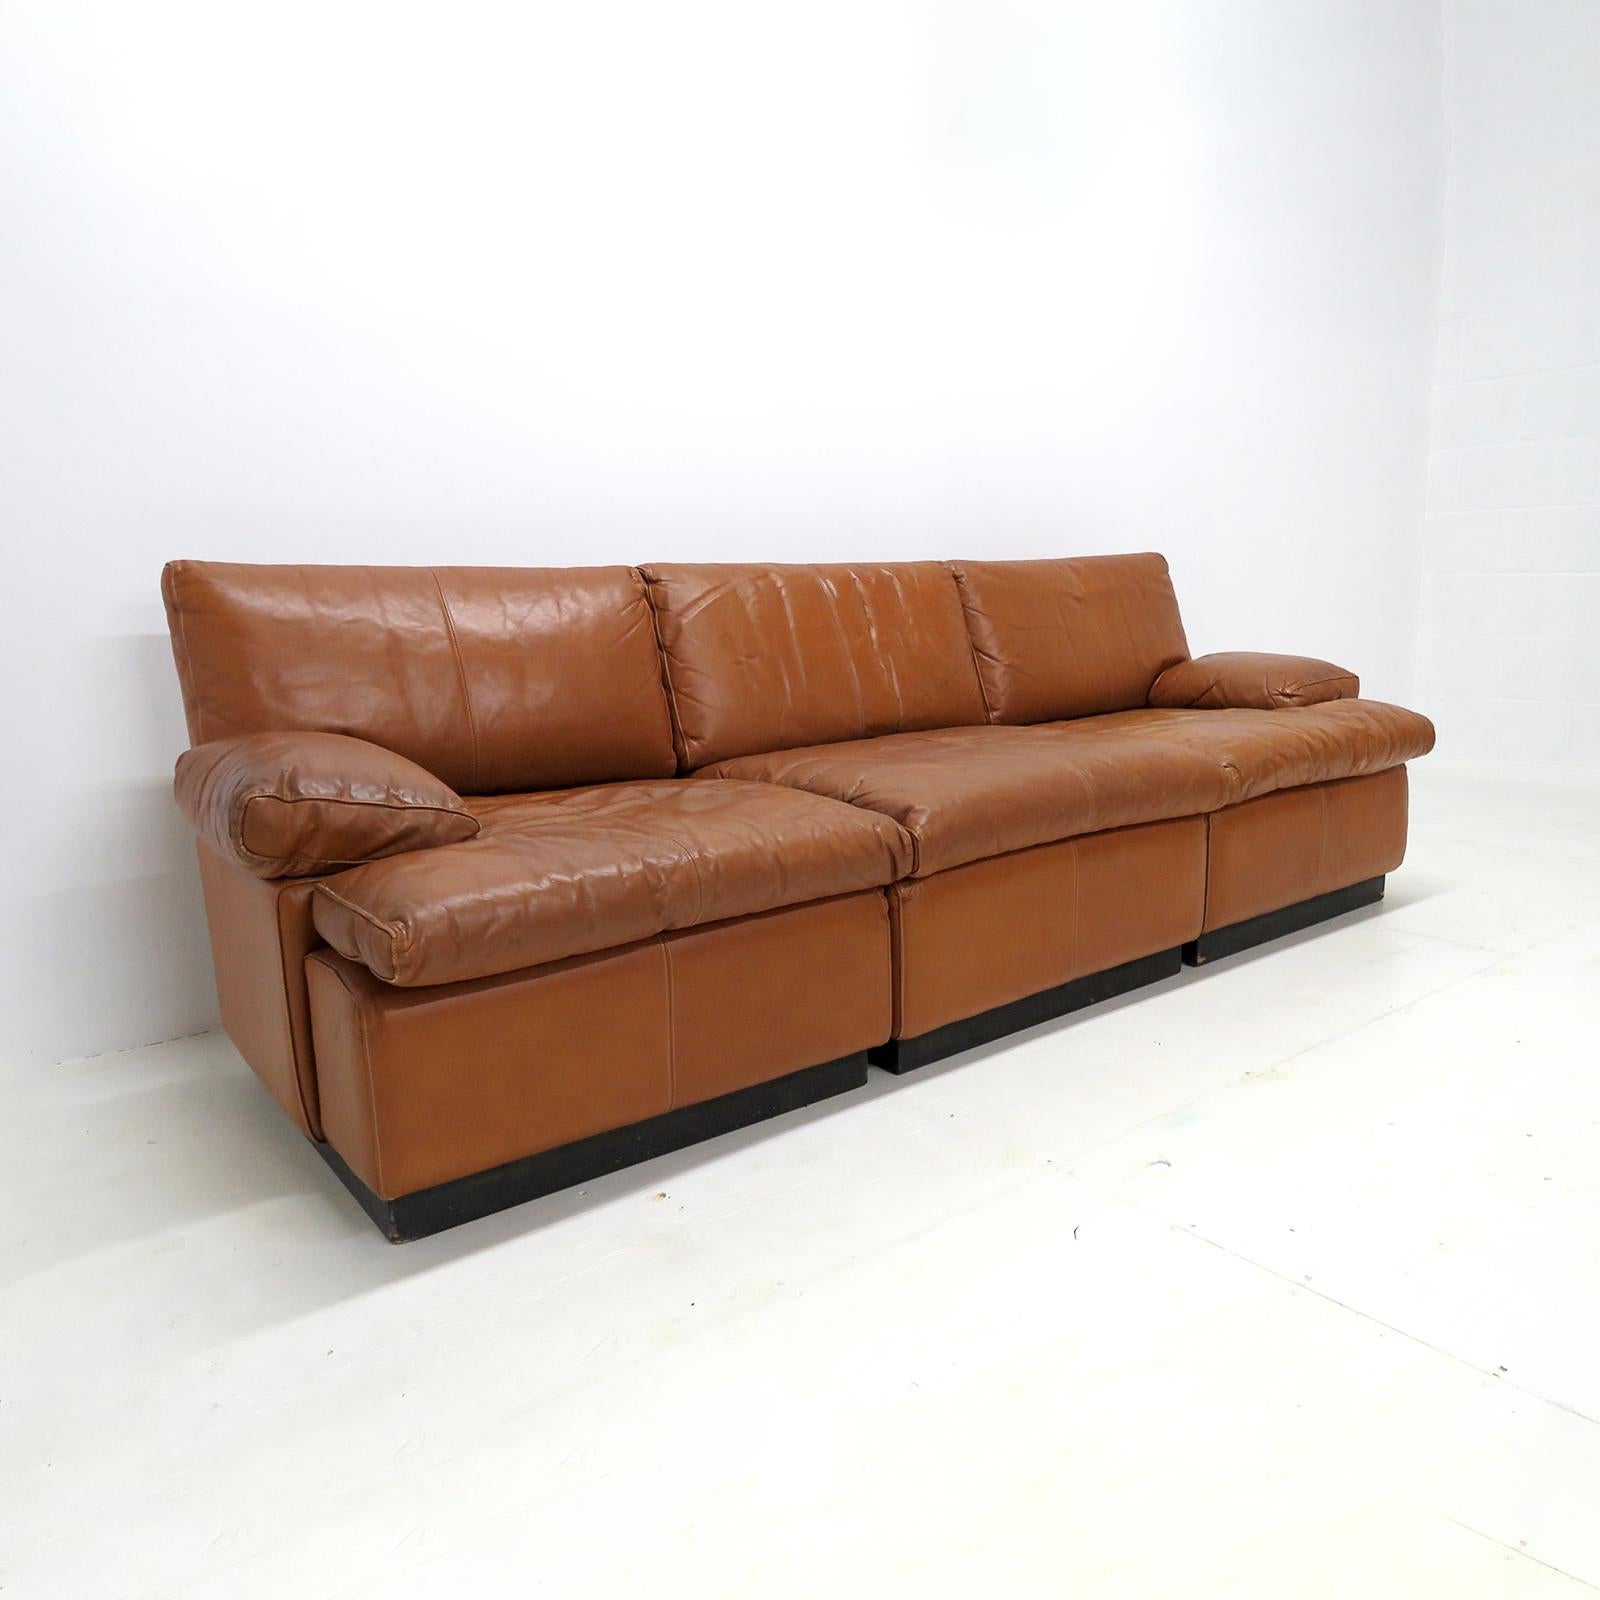 Late 20th Century Finnish Modular Leather Sofa by BJ Dahlquist, 1970 For Sale